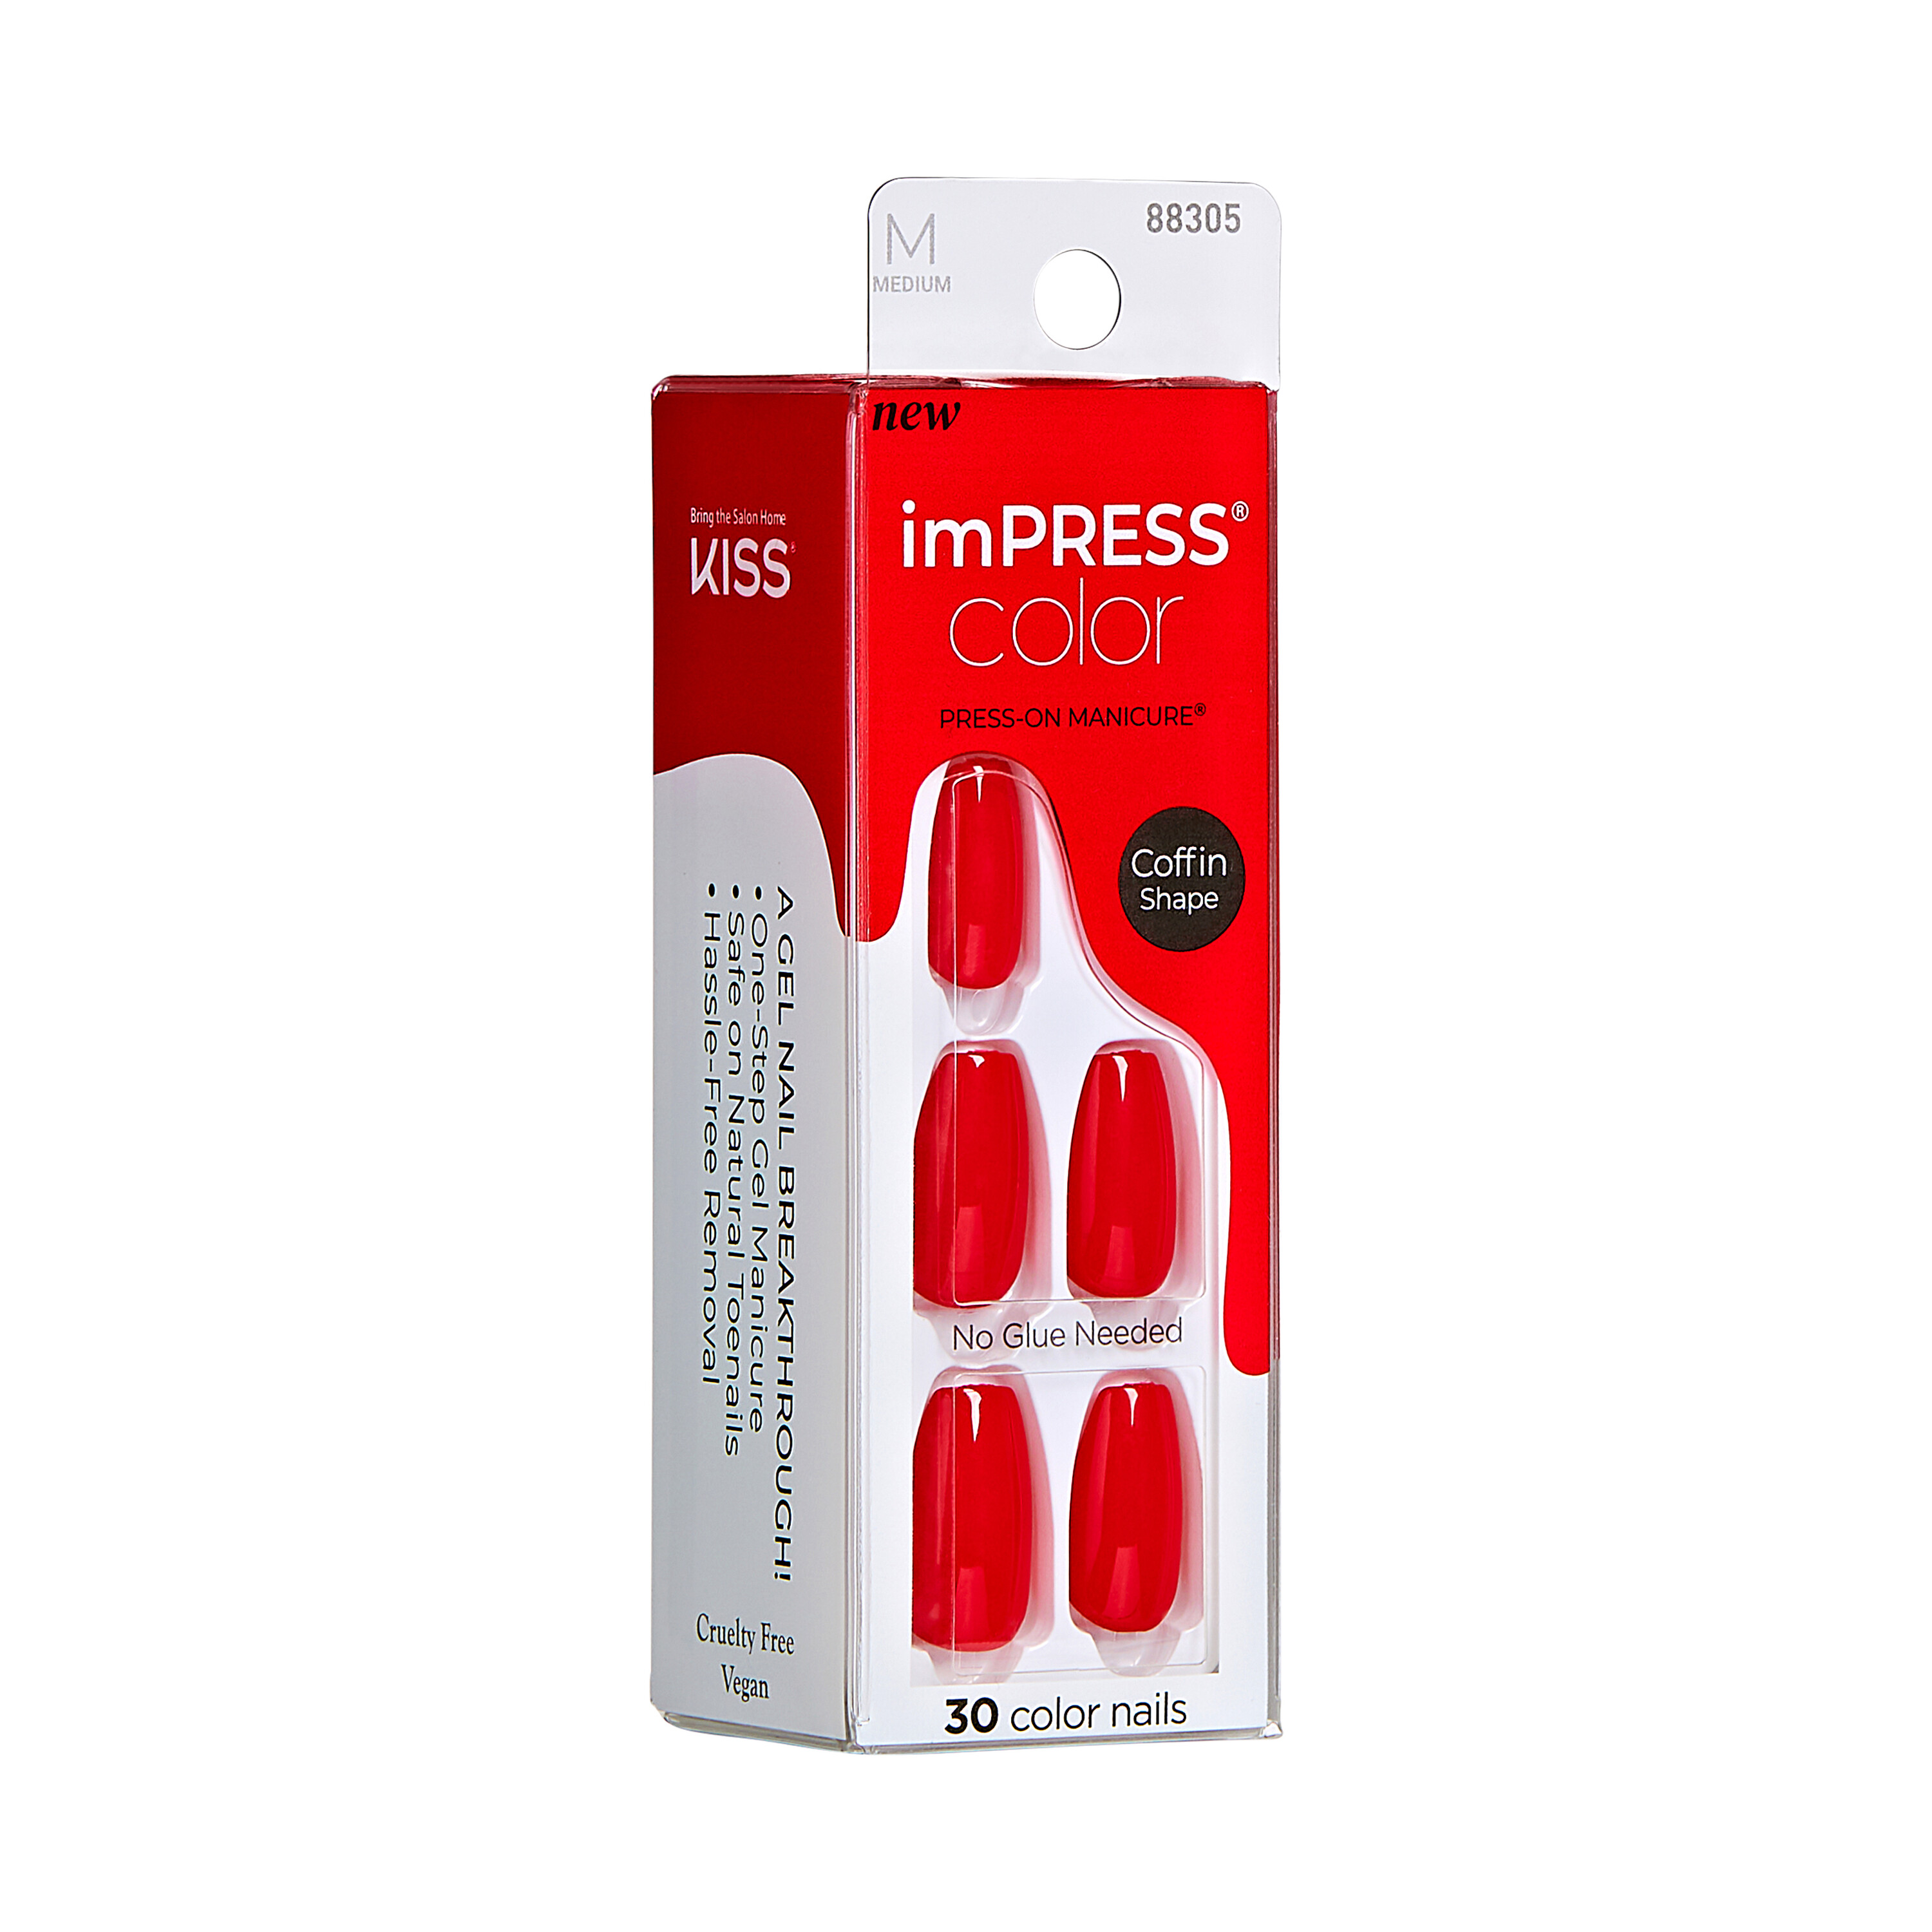 KISS imPRESS Color Long-Lasting Medium Coffin Press-On Nails, Solid Red ...